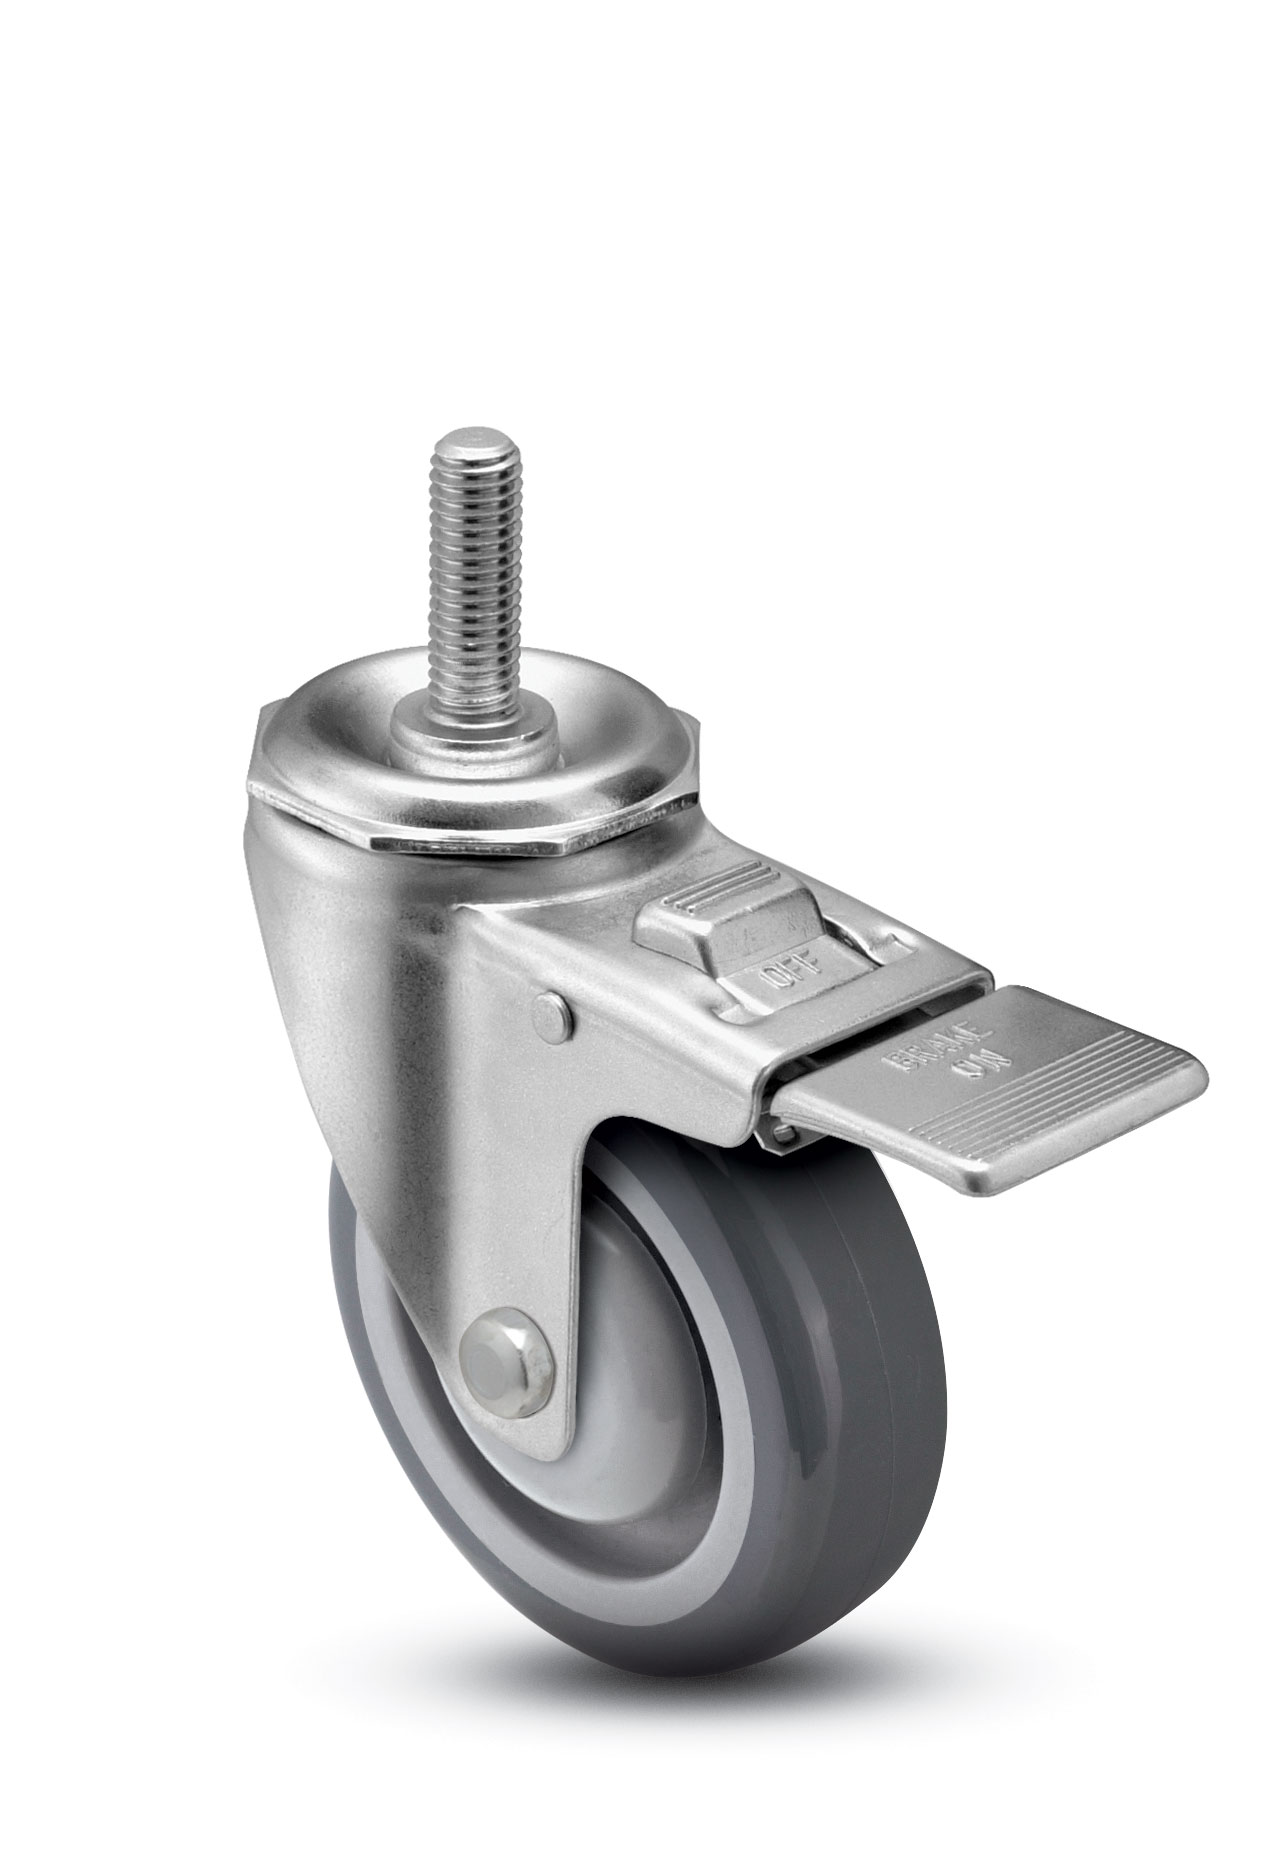 Caster; Swivel; 3" x 1-1/4"; Thermoplastized Rubber (Gray); Threaded Stem (1/2"-13TPI x 1-1/2"); Zinc; Delrin Spanner; 250#; Dust Cover (Mtl); Total Lock (Item #64317)